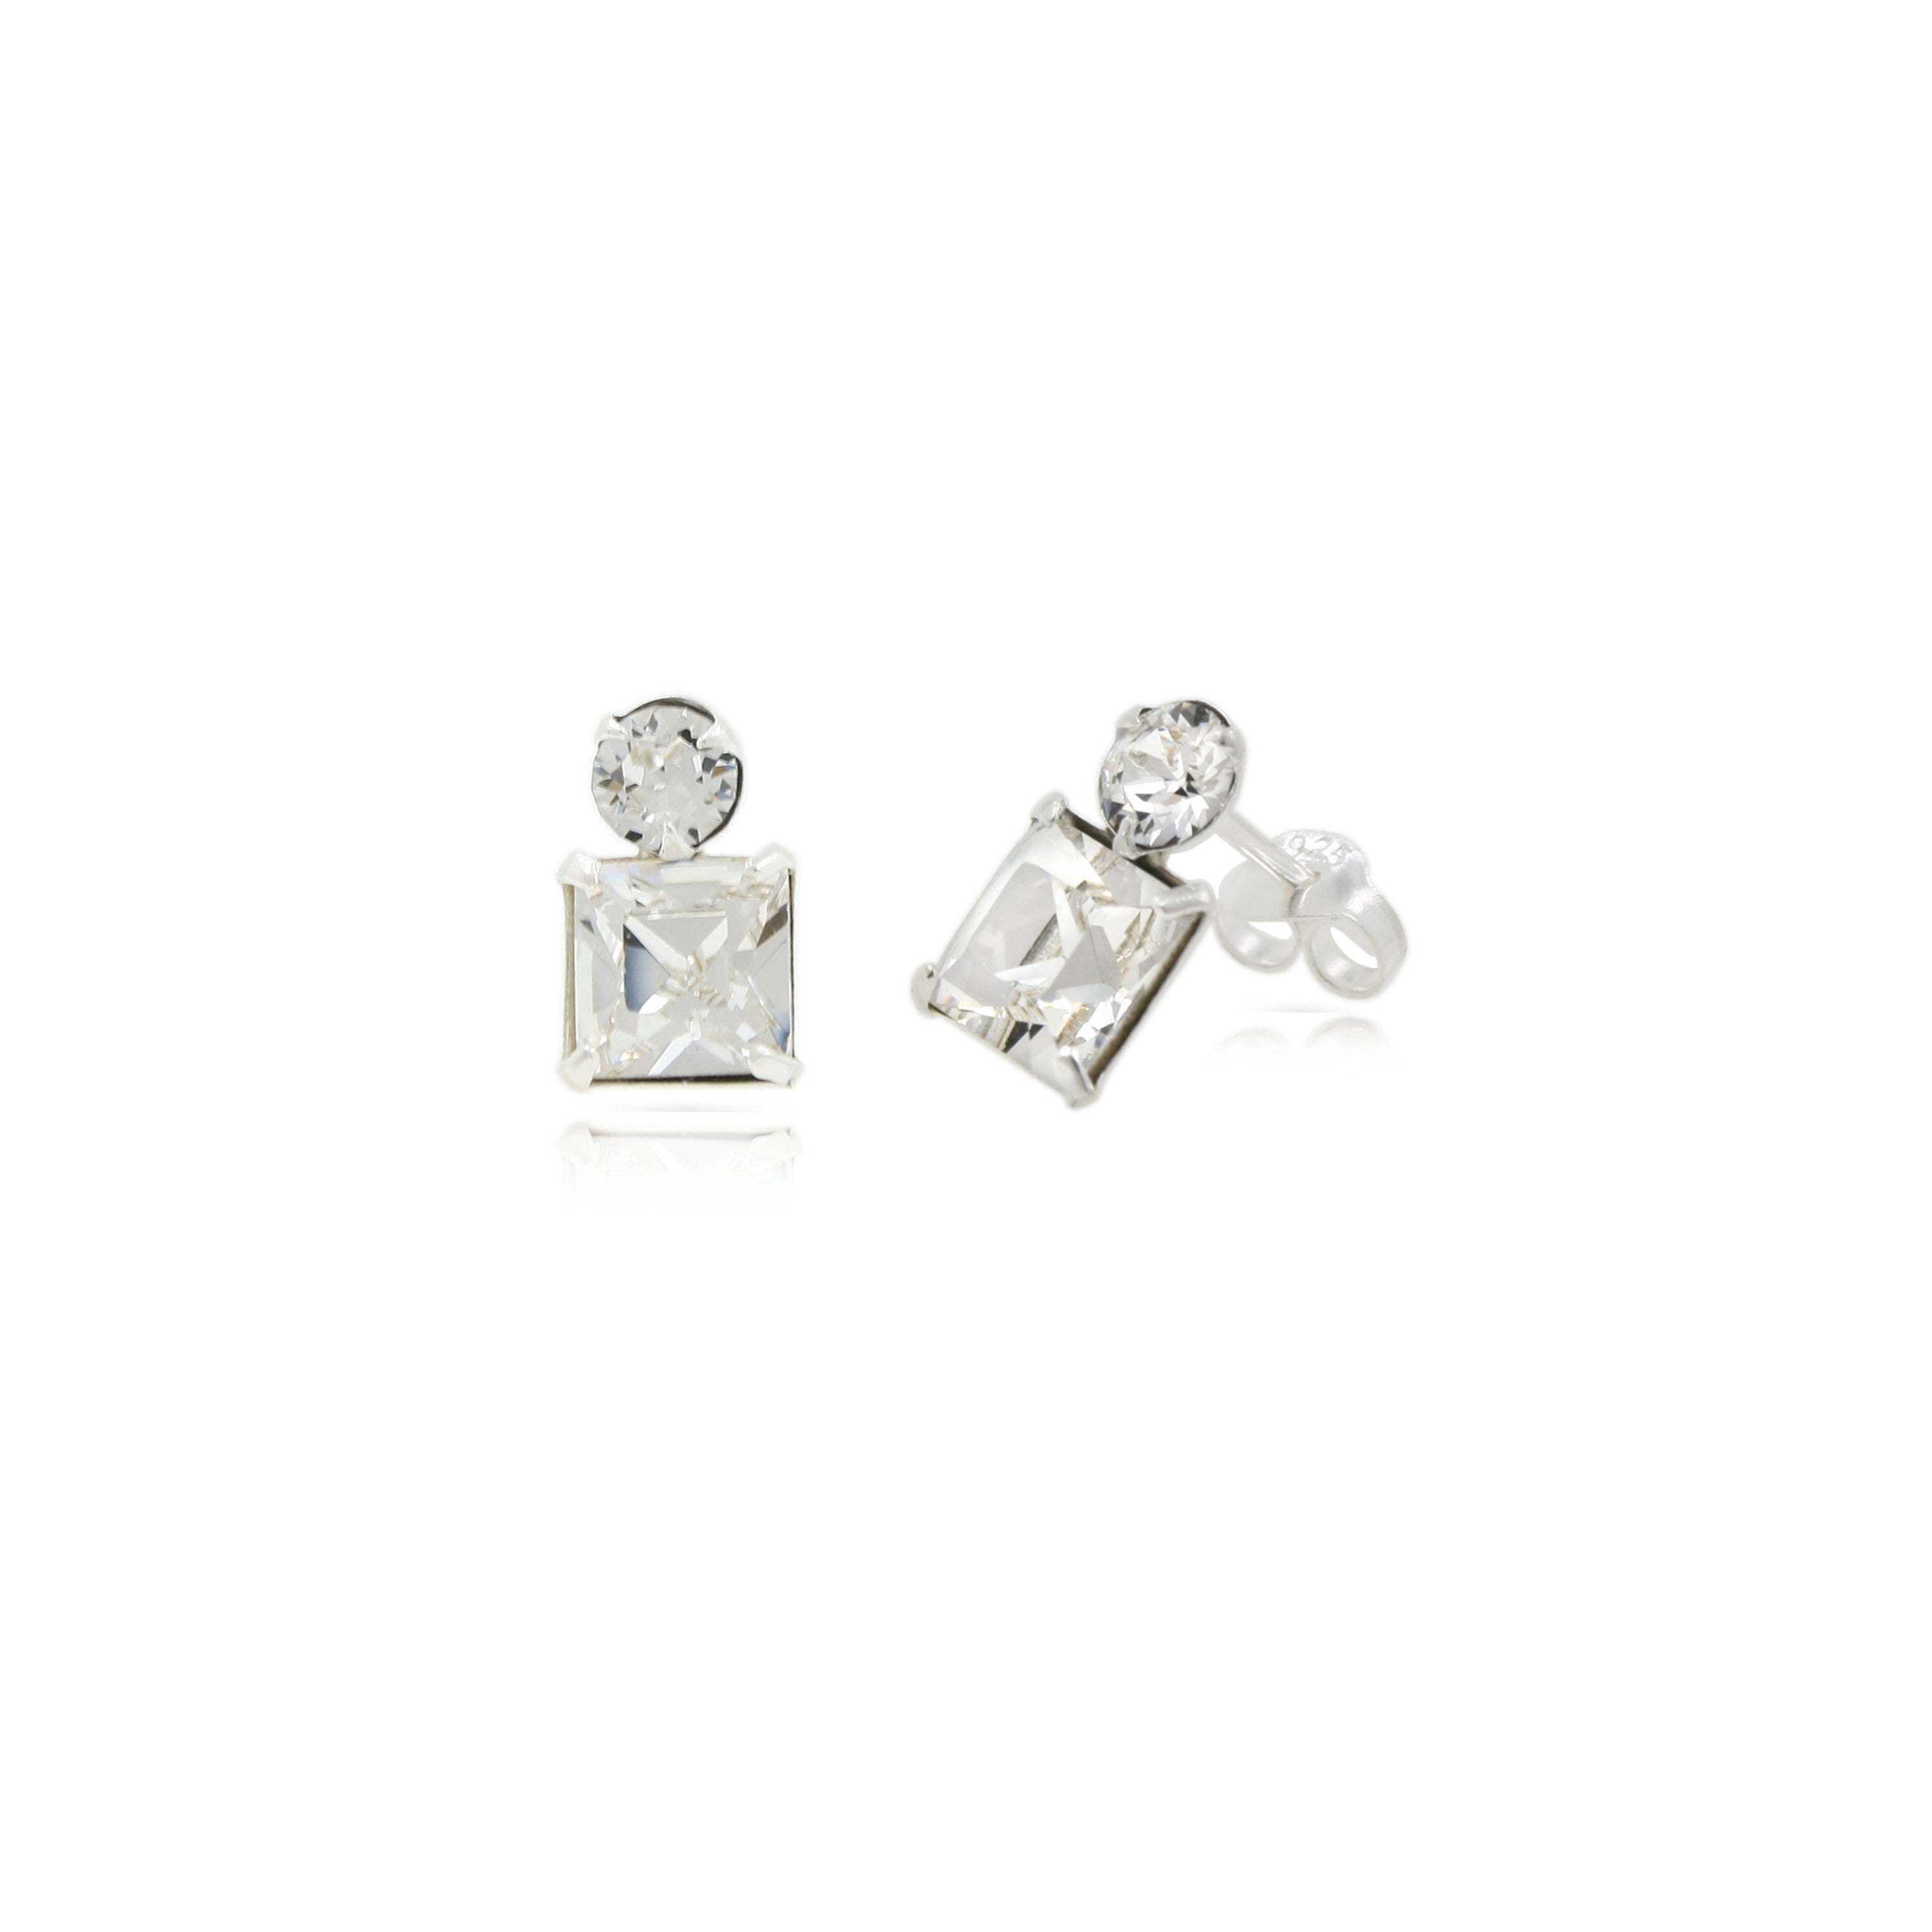 Sterling Silver Stud Drop Earrings with Crystals from Swarovski®